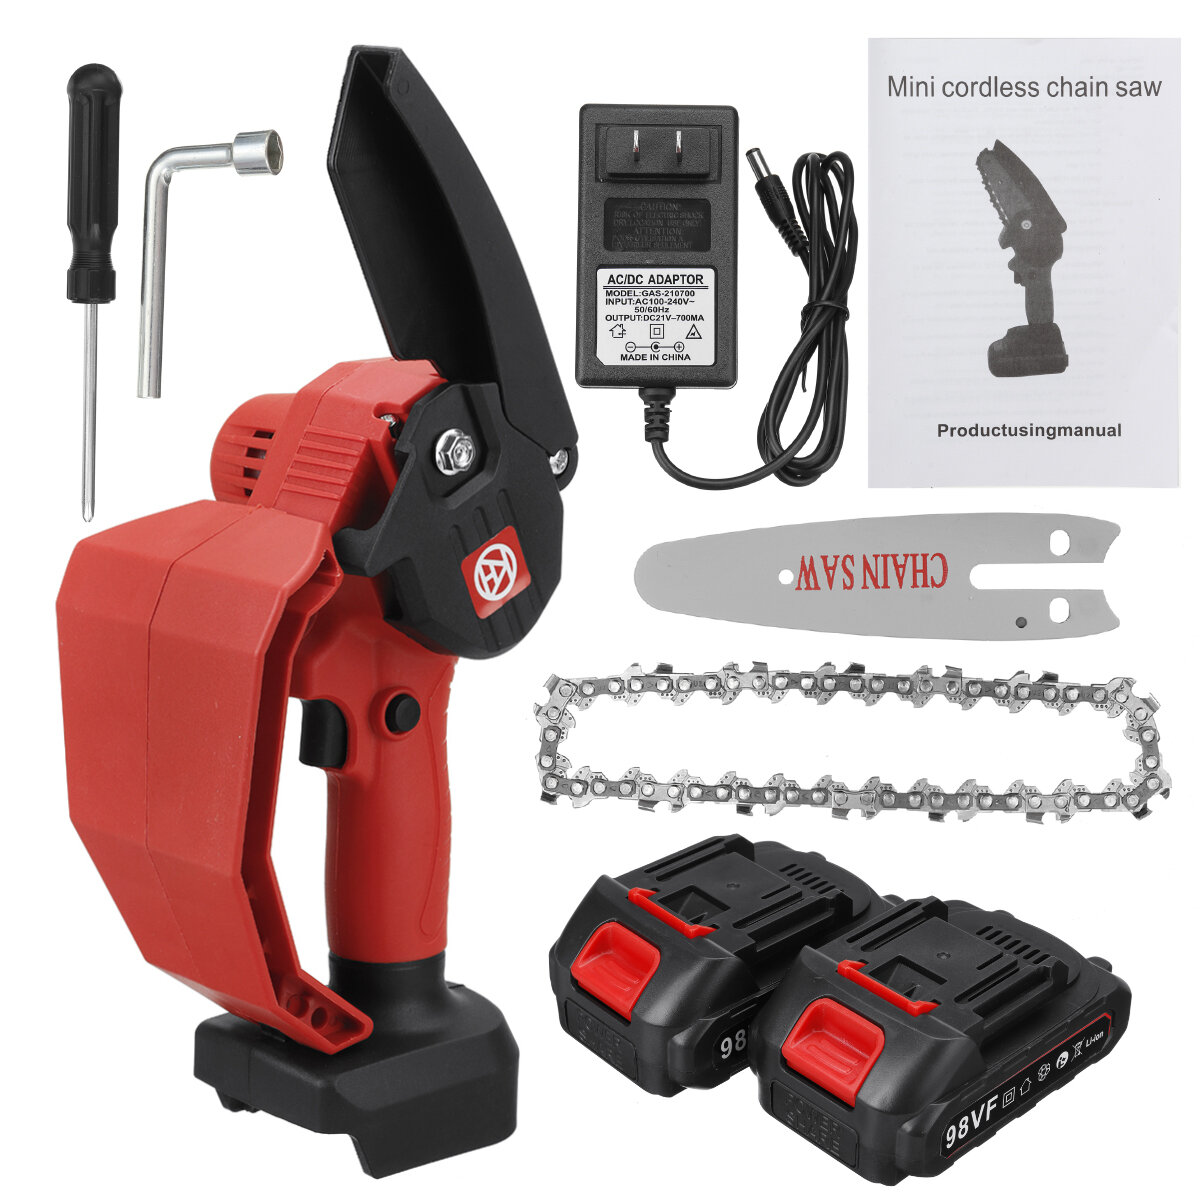 98VF Electric One-Hand Saw Chain Saw Woodworking Belt Hand Guard Kit